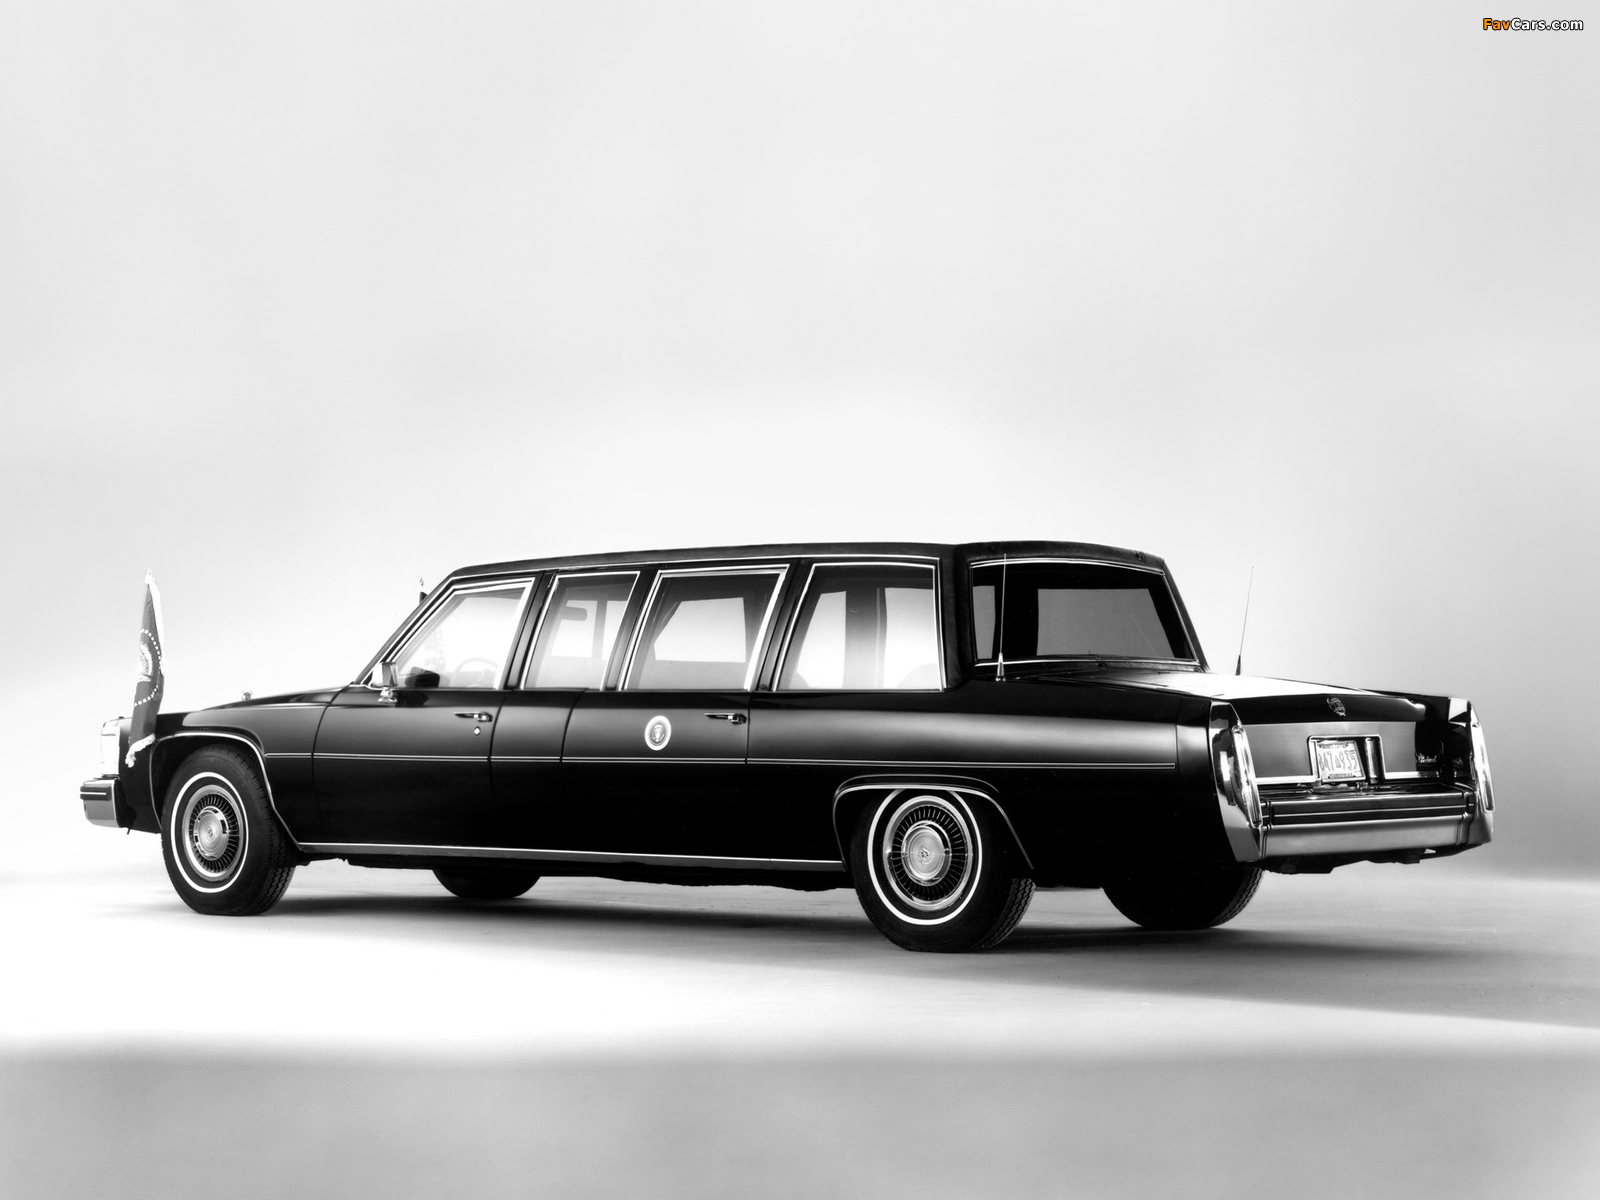 Images of Cadillac Fleetwood Presidential Limousine 1983 (1600 x 1200)